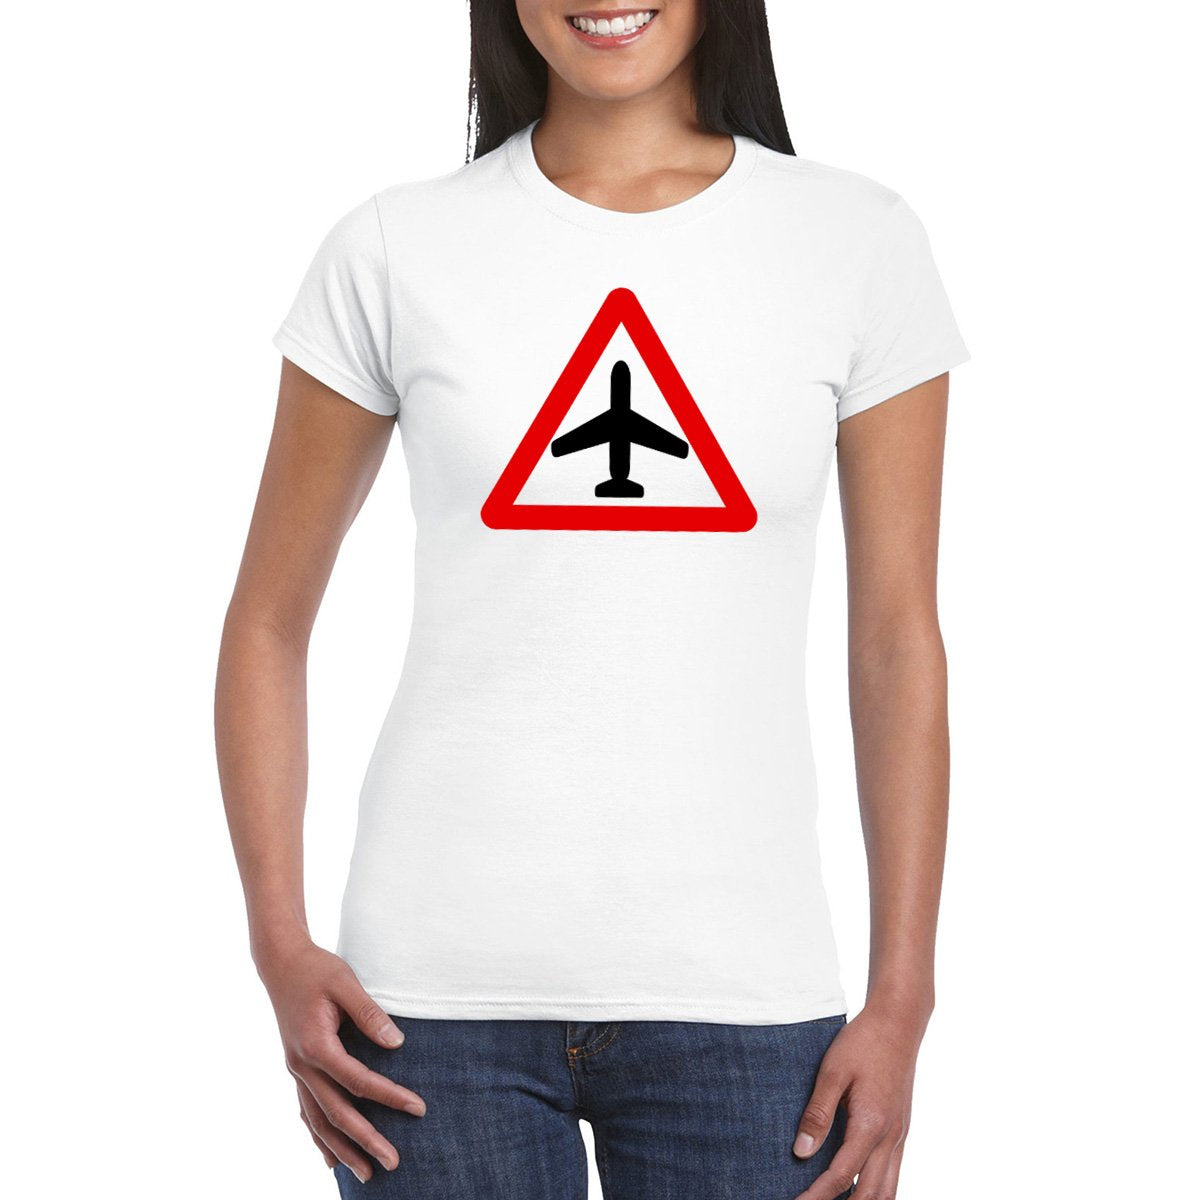 CAUTION AIRCRAFT Semi-Fitted Women's T-Shirt